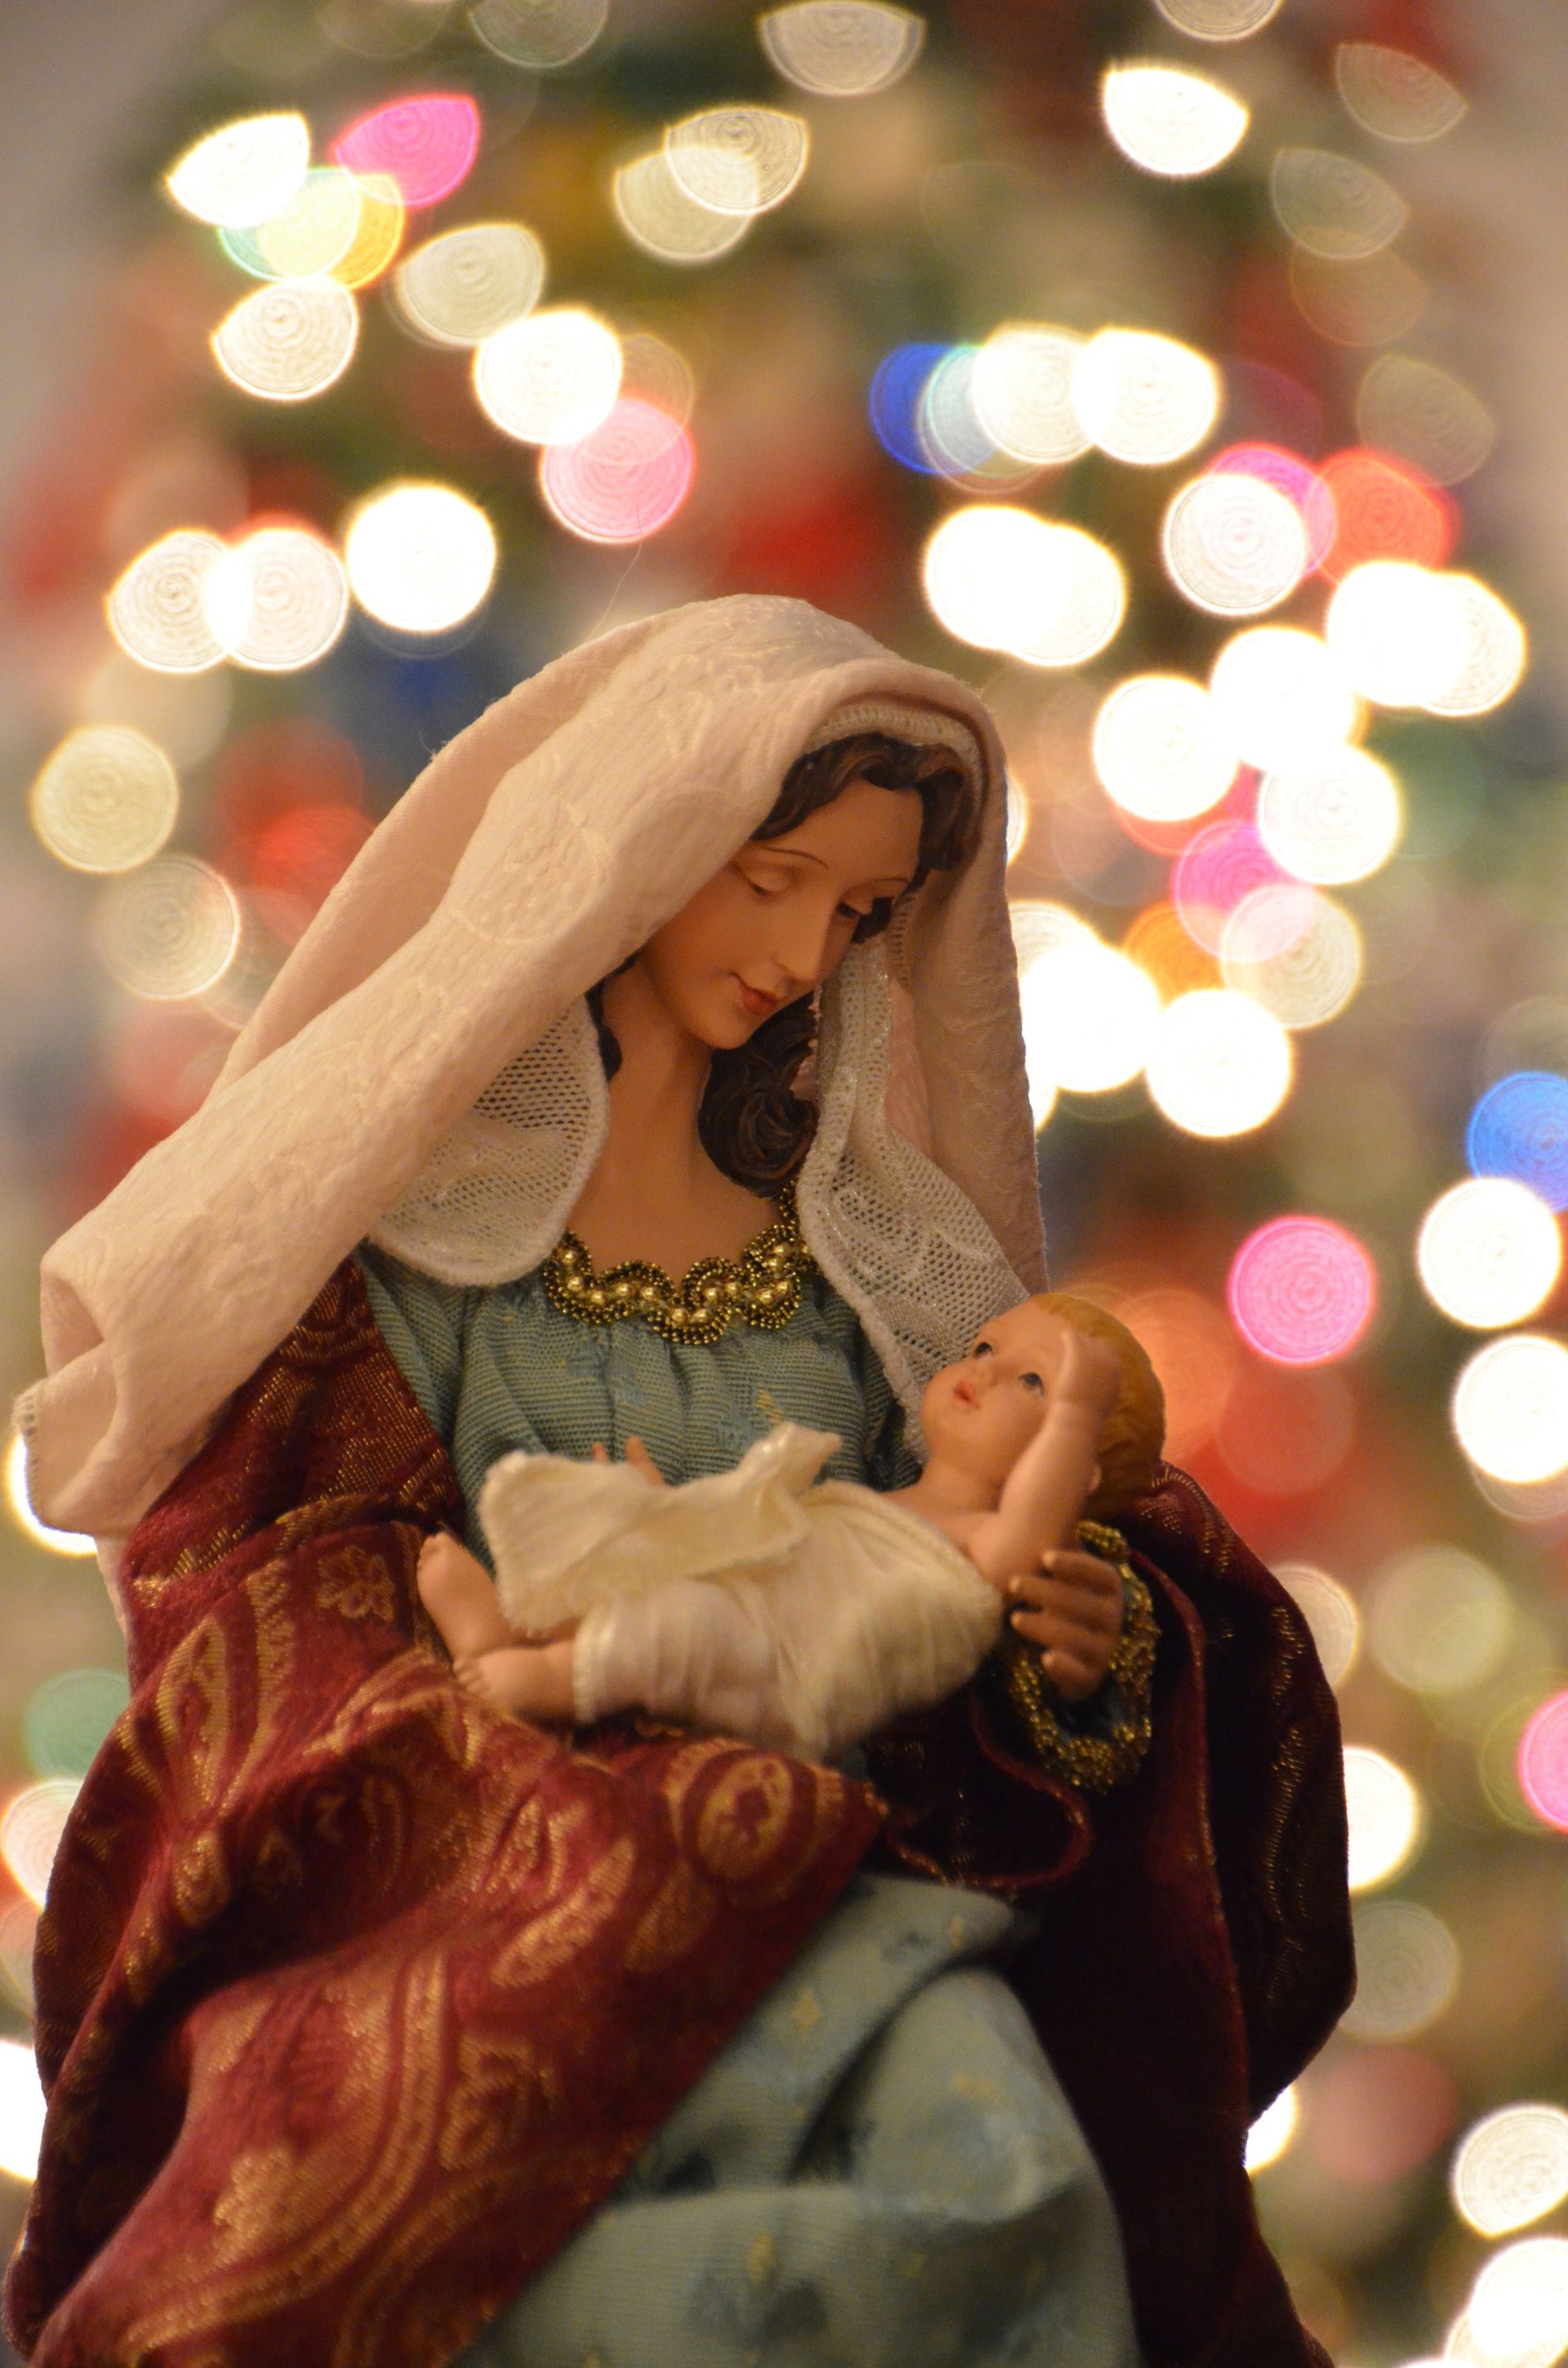 A Nativity figurine representing Mary and Jesus in front of colorful Christmas lights.